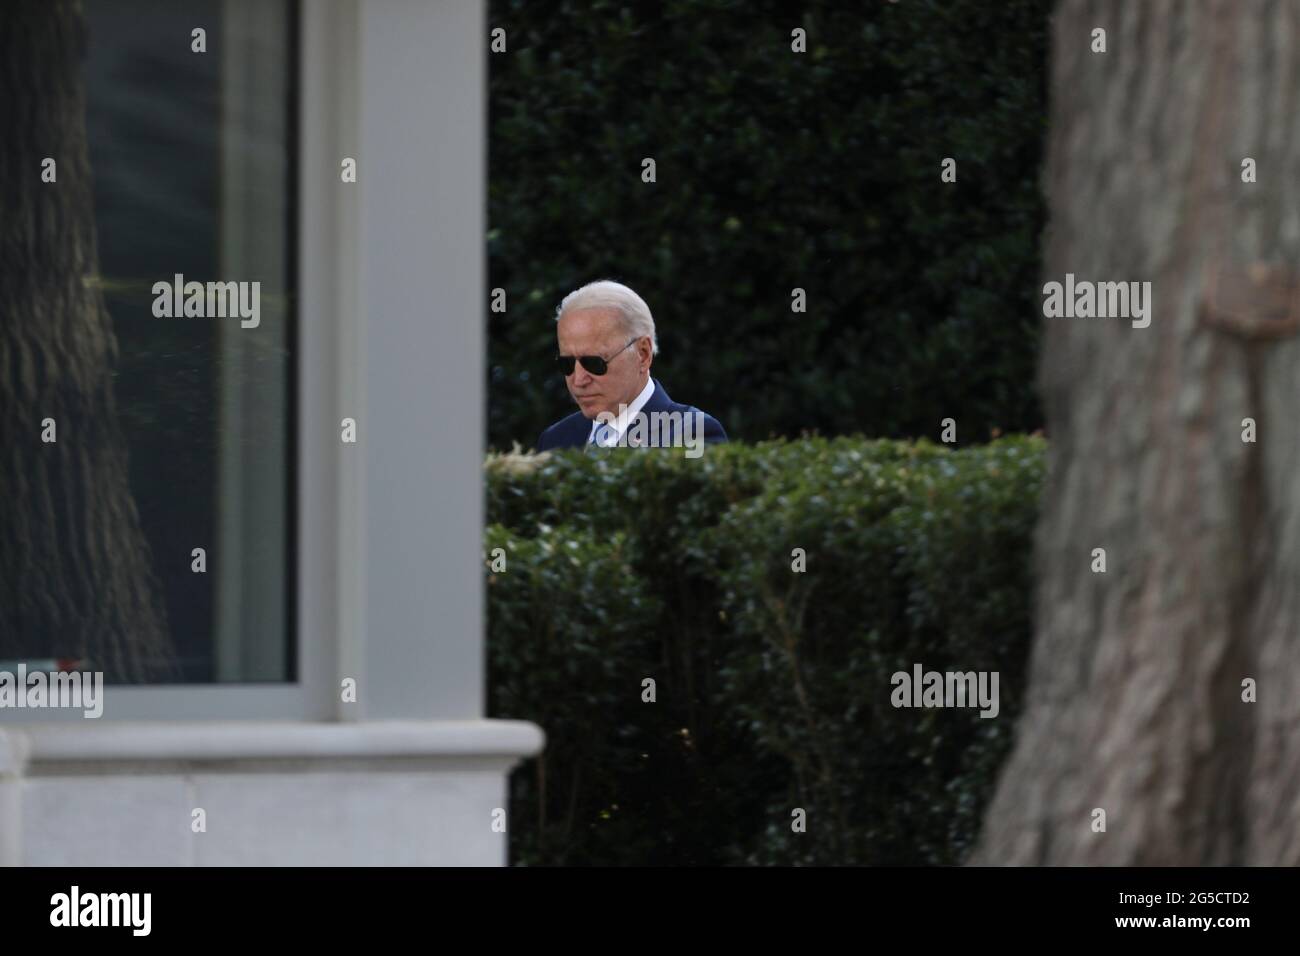 United States President Joe Biden walks on the South Lawn of the White  House before boarding Marine One on Friday, June 25, 2021 in Washington,  DC., for a trip to Camp David,